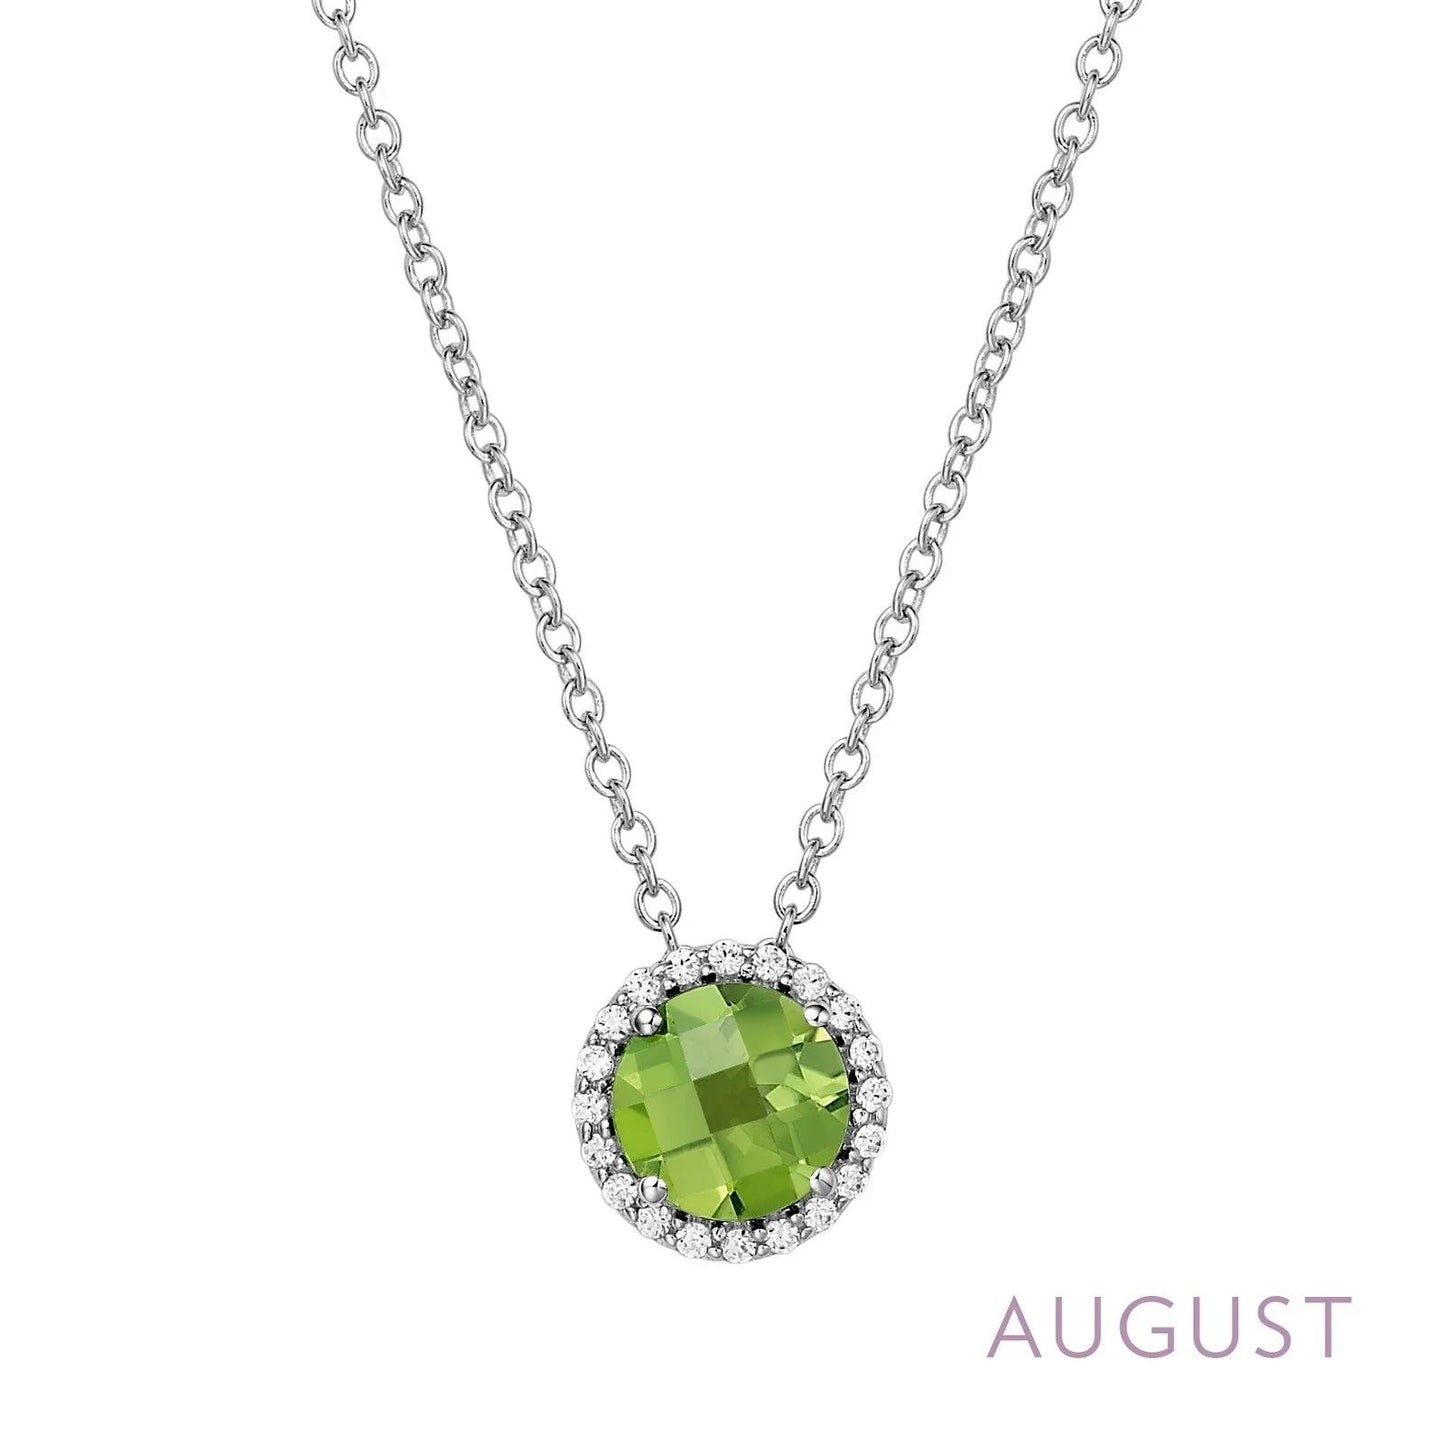 Sterling Silver August Birthstone Necklace